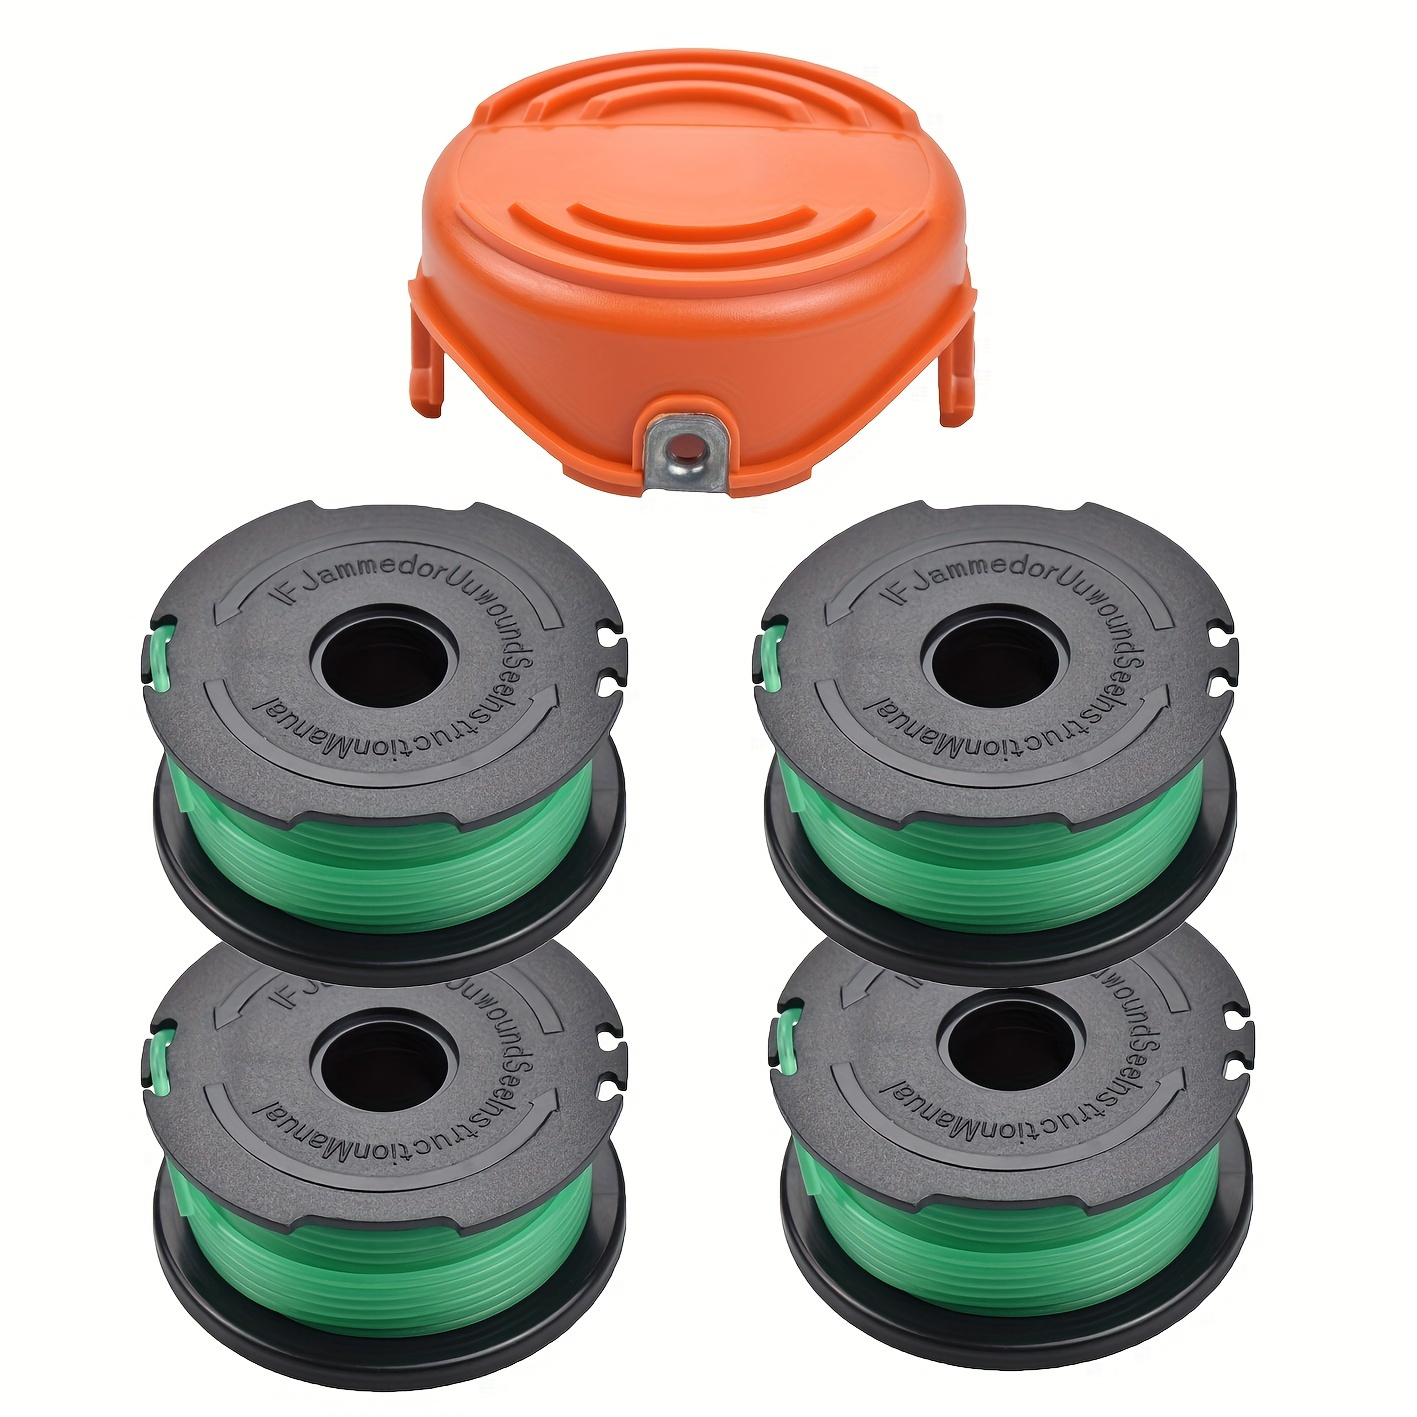 Weed Eater Wacker String 0.065 Trimmer line Spool,Autofeed Black and Decker